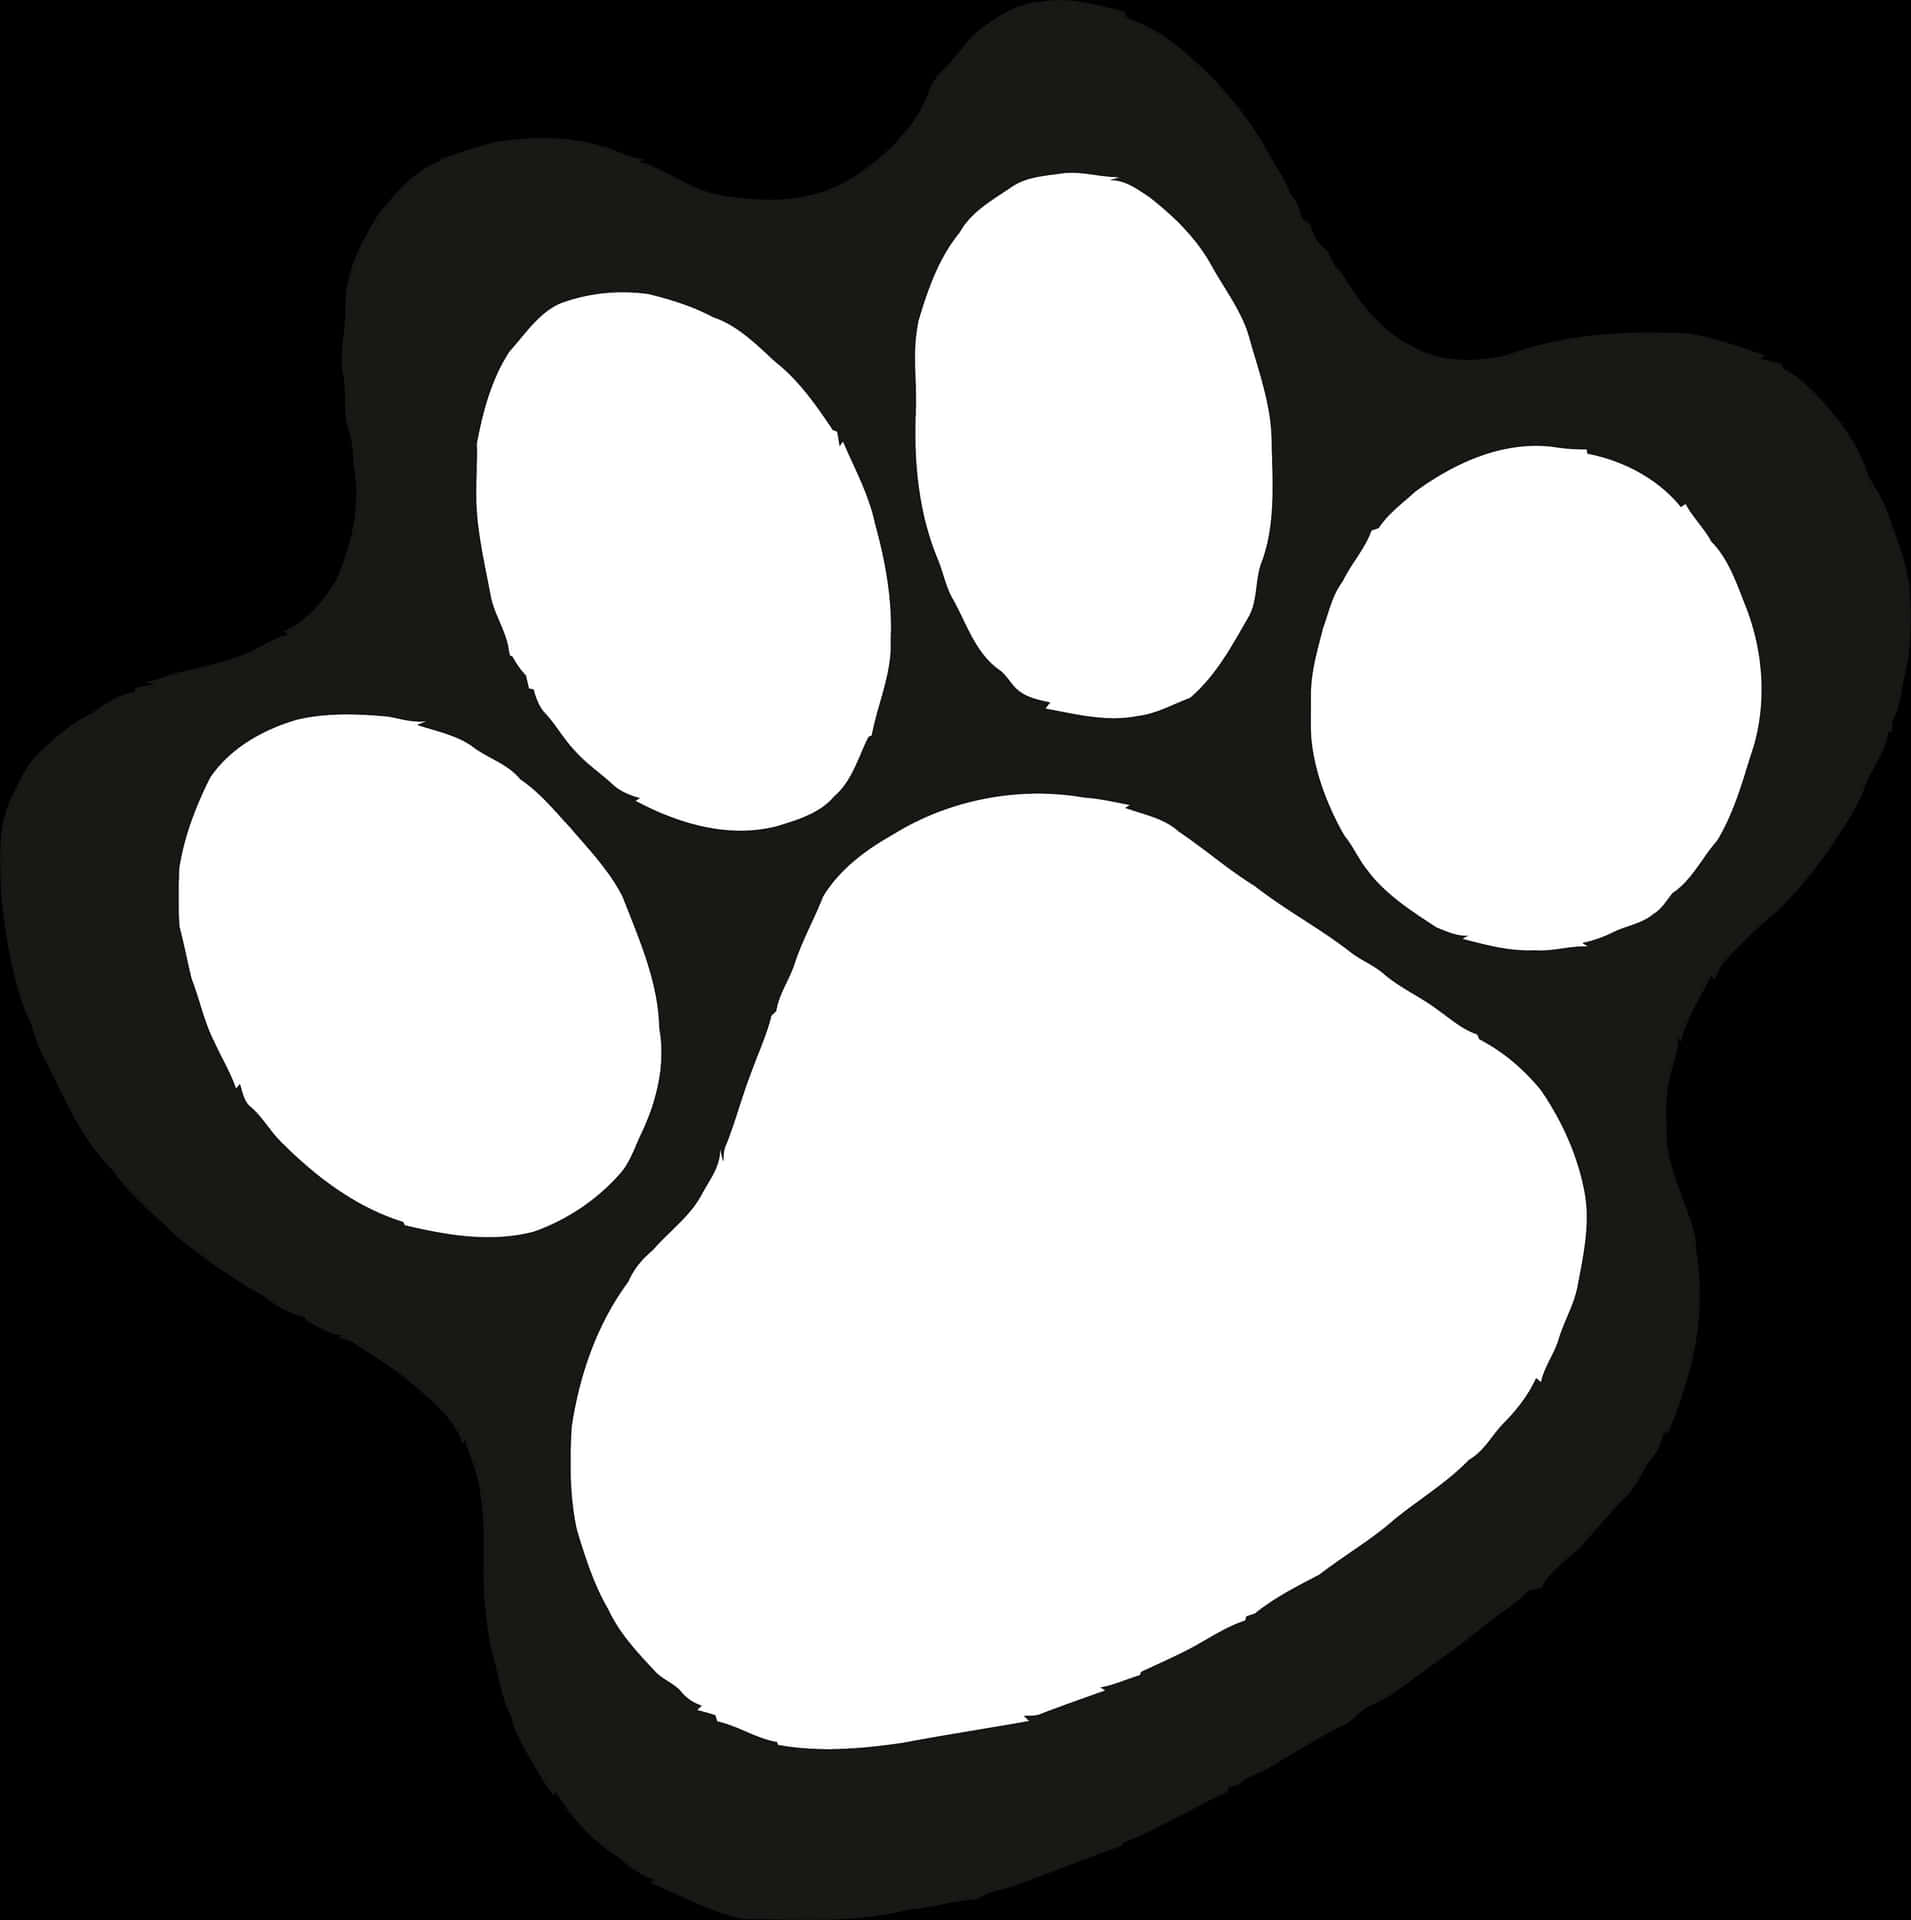 Blackand White Paw Print Graphic PNG image